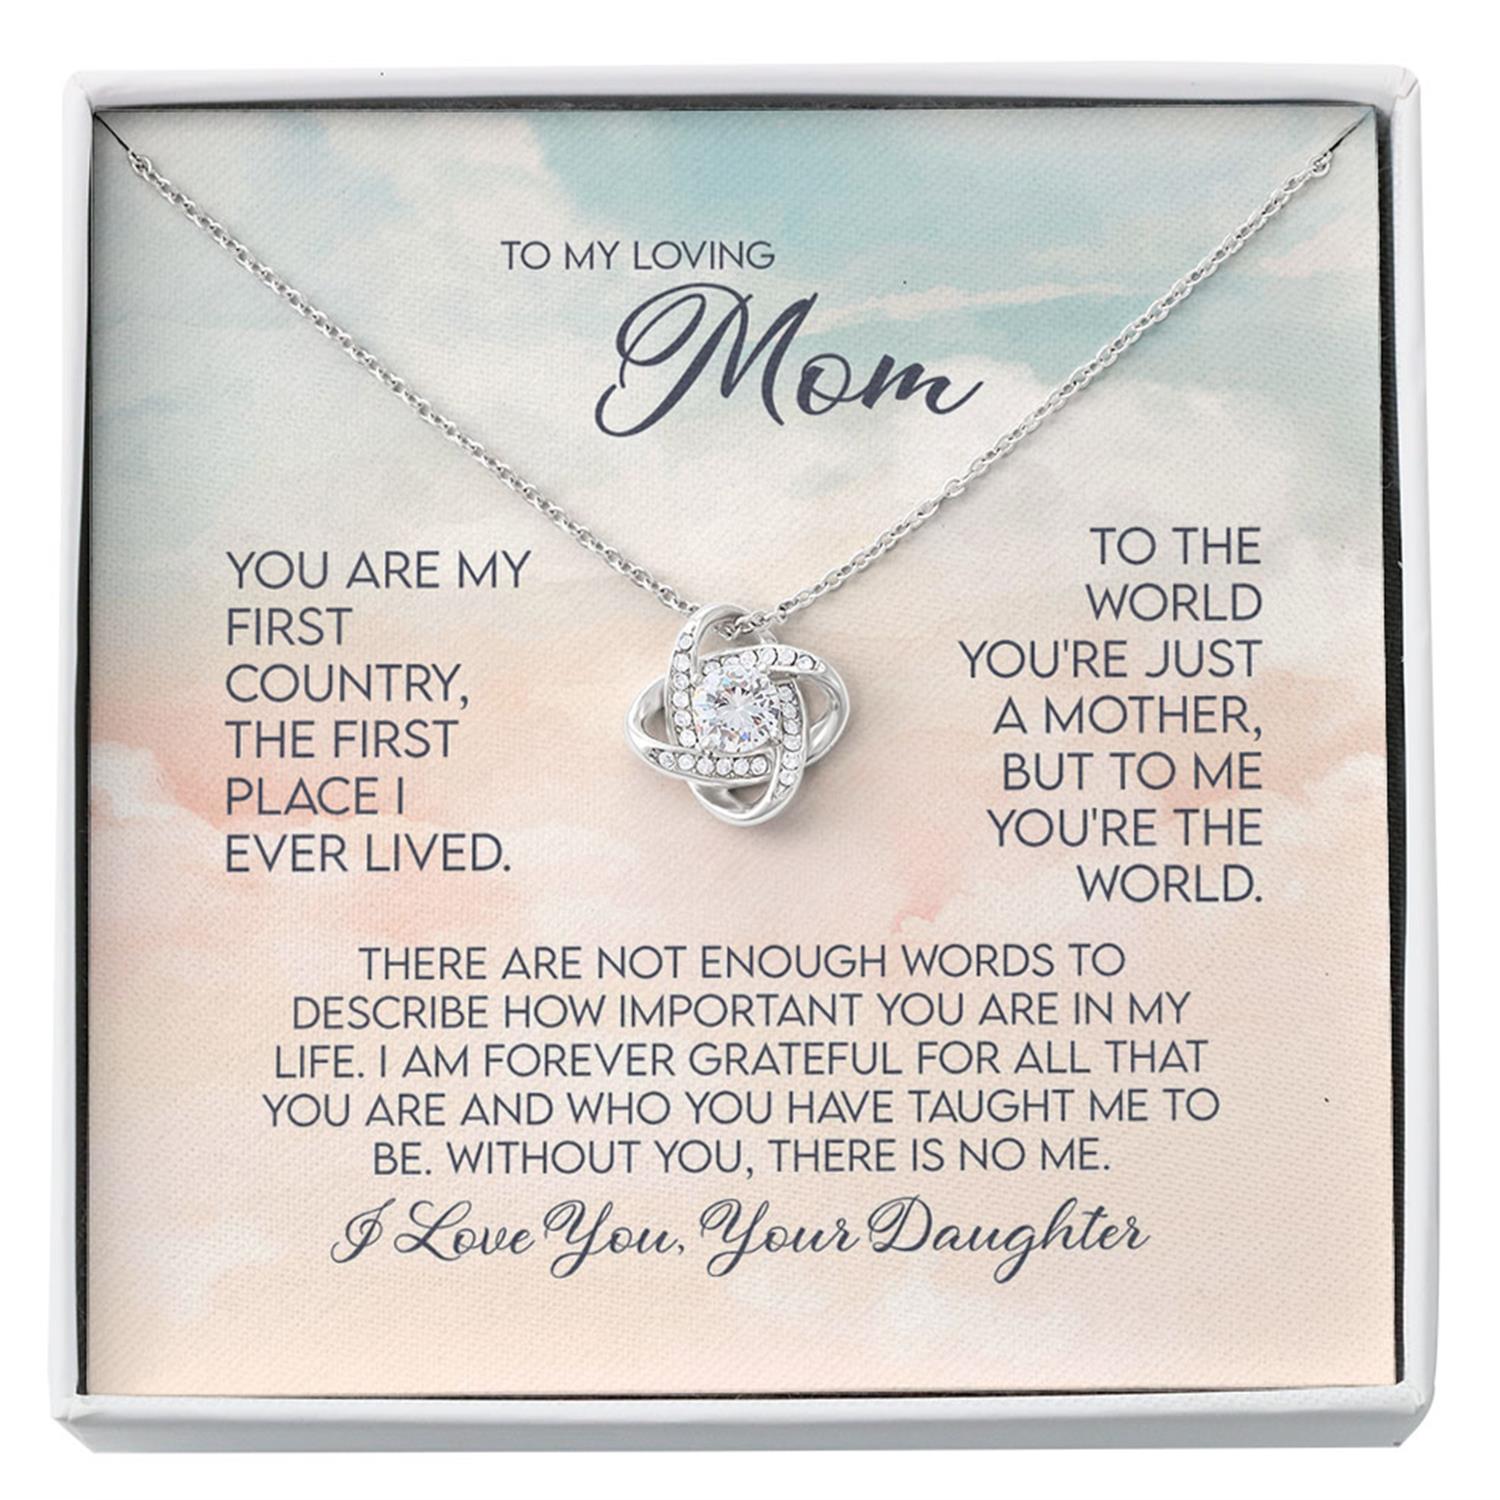 Mom Necklace Gift- You're The World Necklace, Mom Gift From Daughter, Mother Daughter Custom Necklace